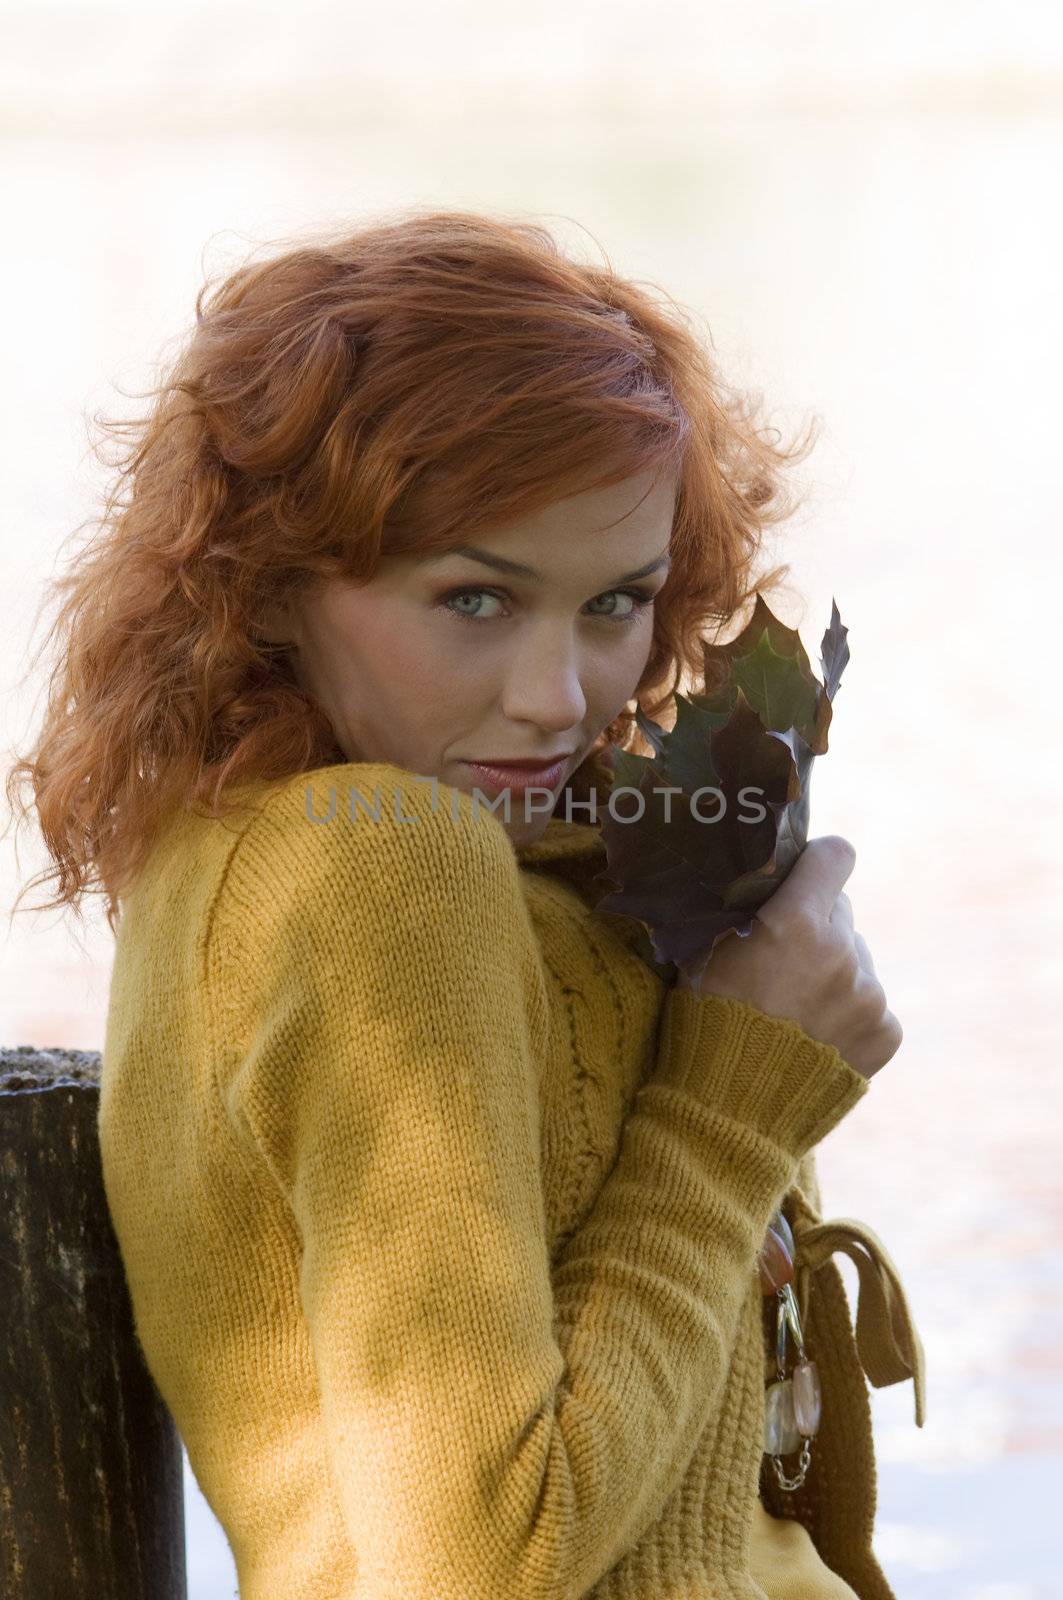 pretty close up of red-haired woman playing with leaf outdoor